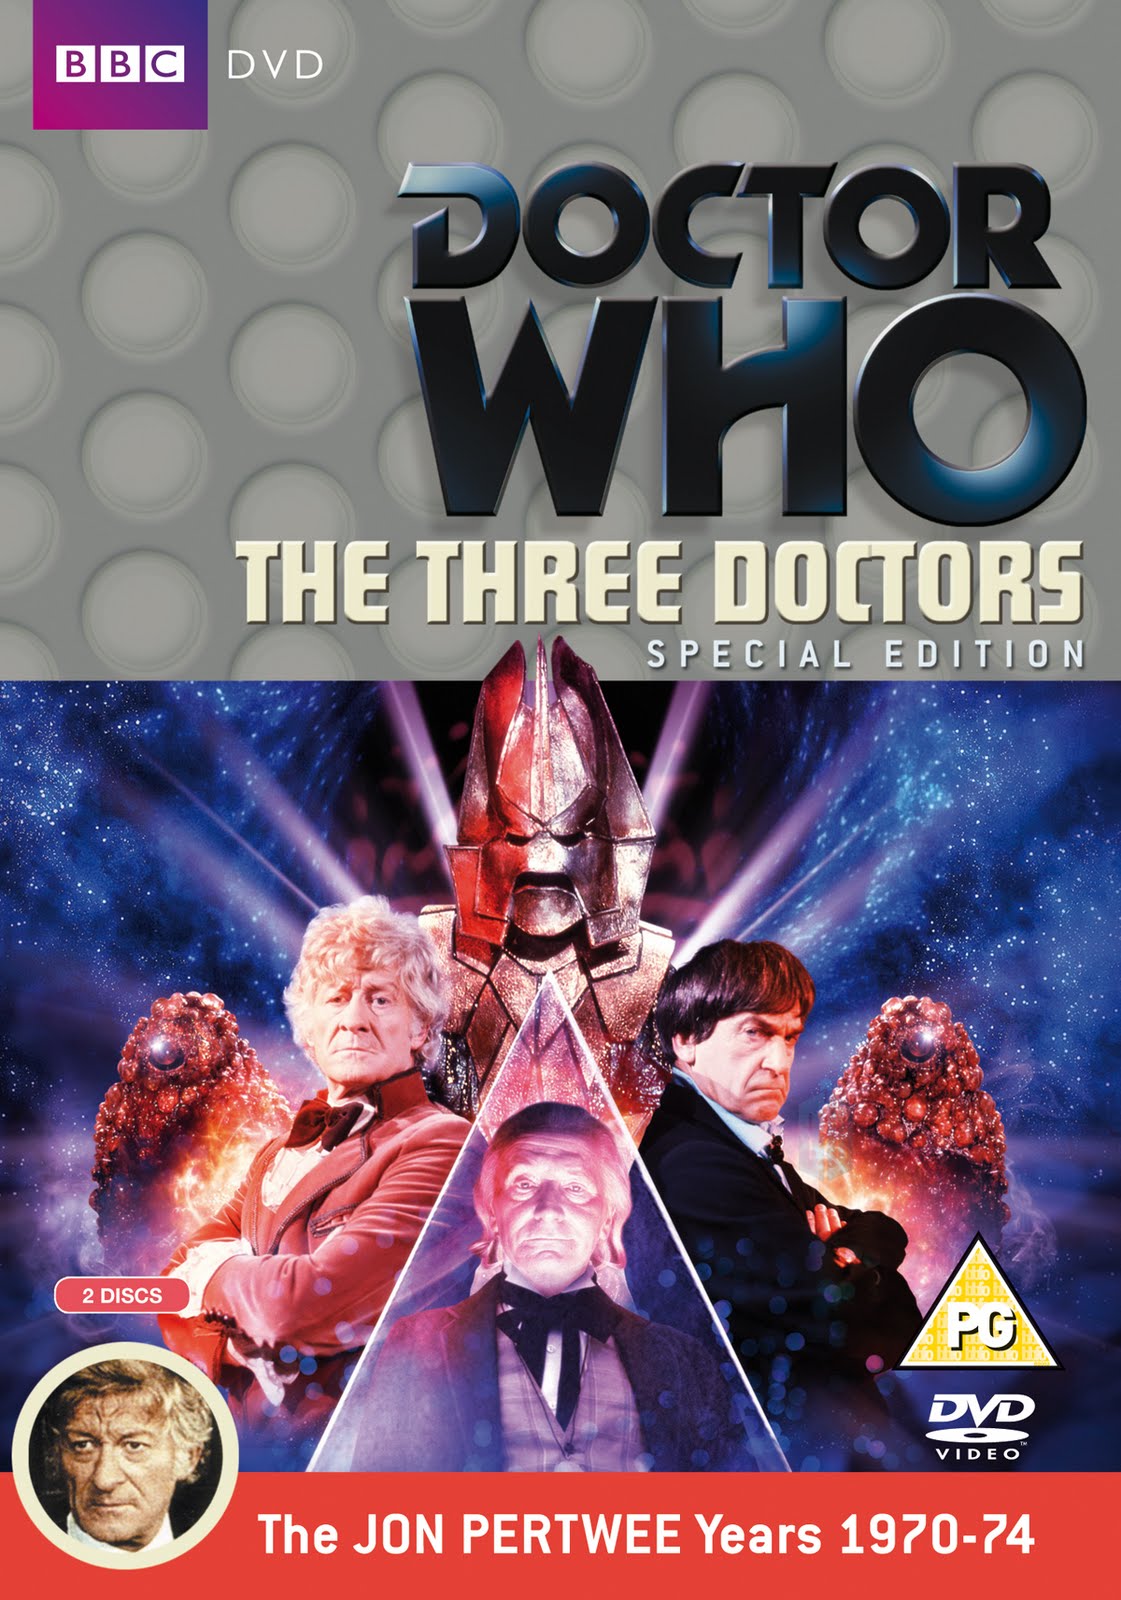 The Three Doctors: Special Edition | Doctor Who DVD Special